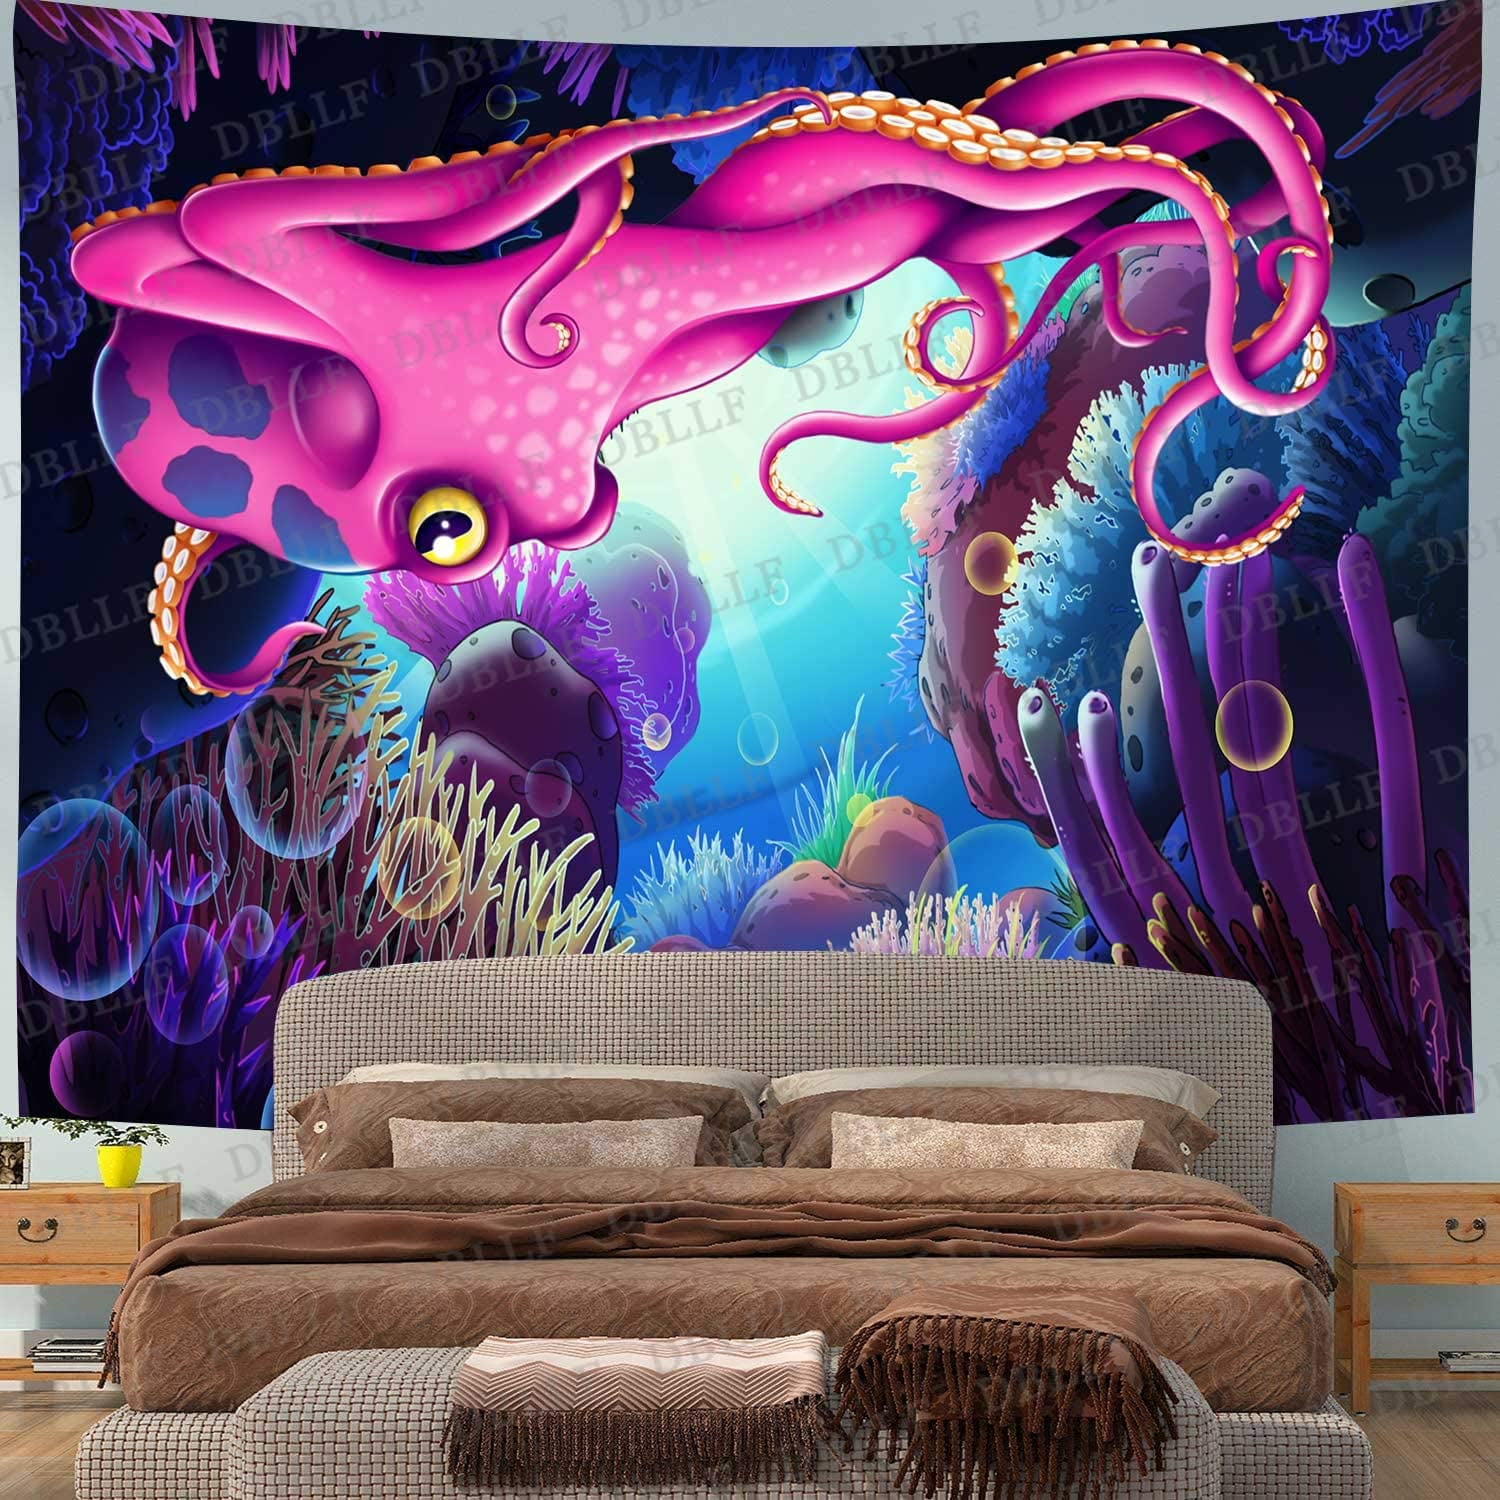 The Sea World Tapestry Wall Hanging Colorful Sea Tapestry Art Home Wall Decor 